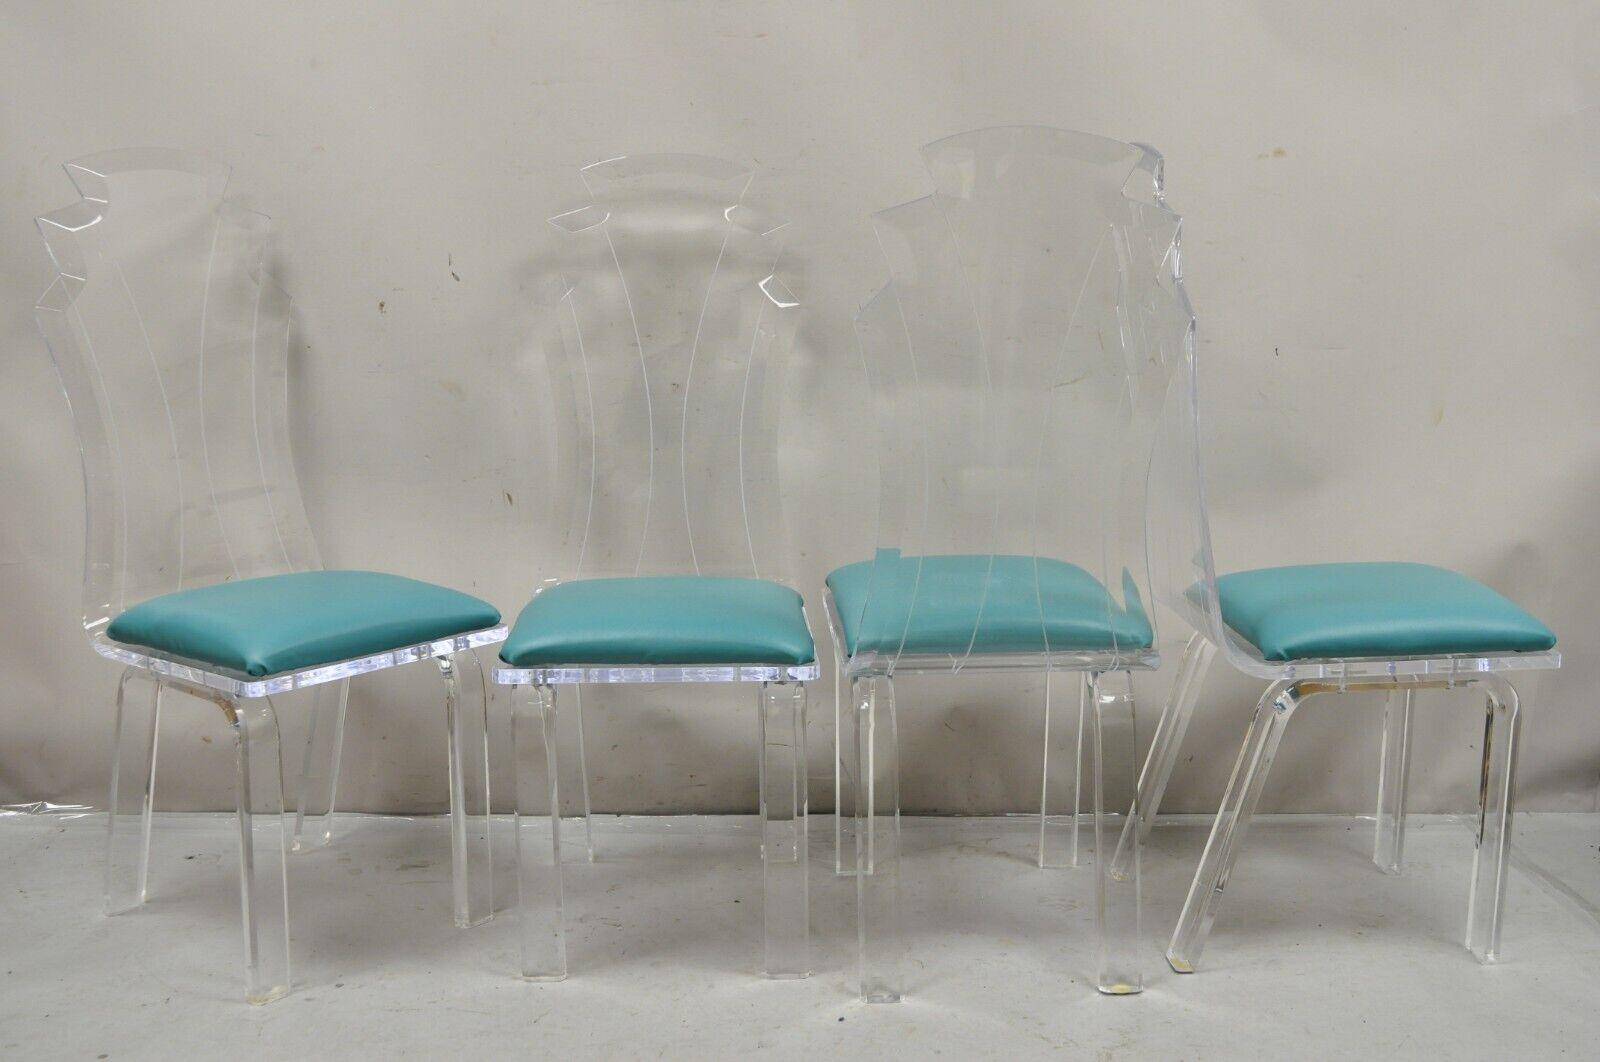 Vintage Hollywood Regency Clear Lucite Acrylic Mid Century Sculptural Dining Table & 4 Chairs - 5 Pc Set. Item features  (4) high back sculptural dining chairs with etched design, heavy thick lucite construction, original teal blue vinyl upholstery,